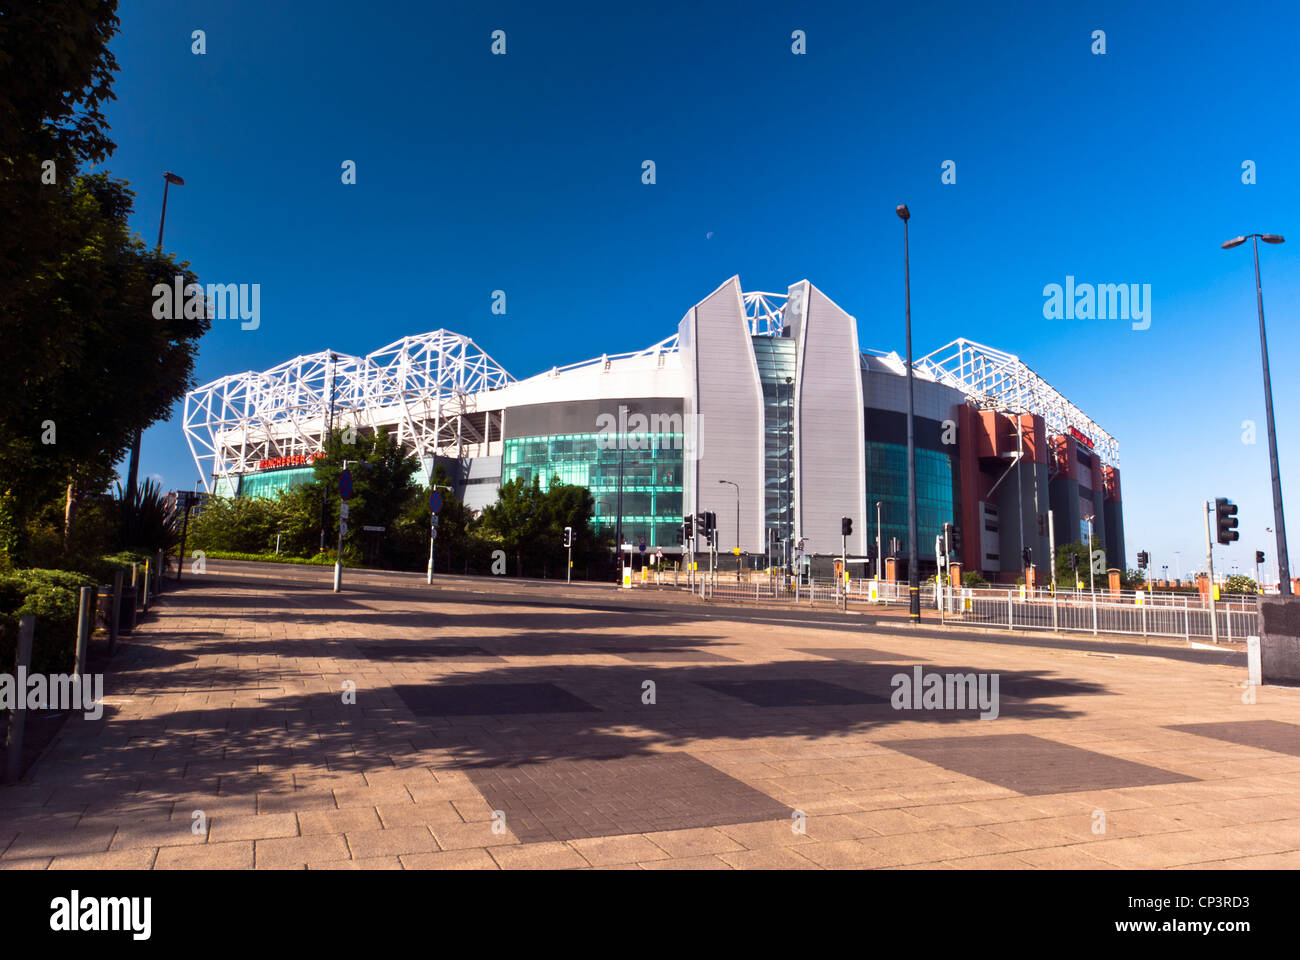 Terrain de football Manchester United', 'Old Trafford, Manchester, Angleterre, RU Banque D'Images